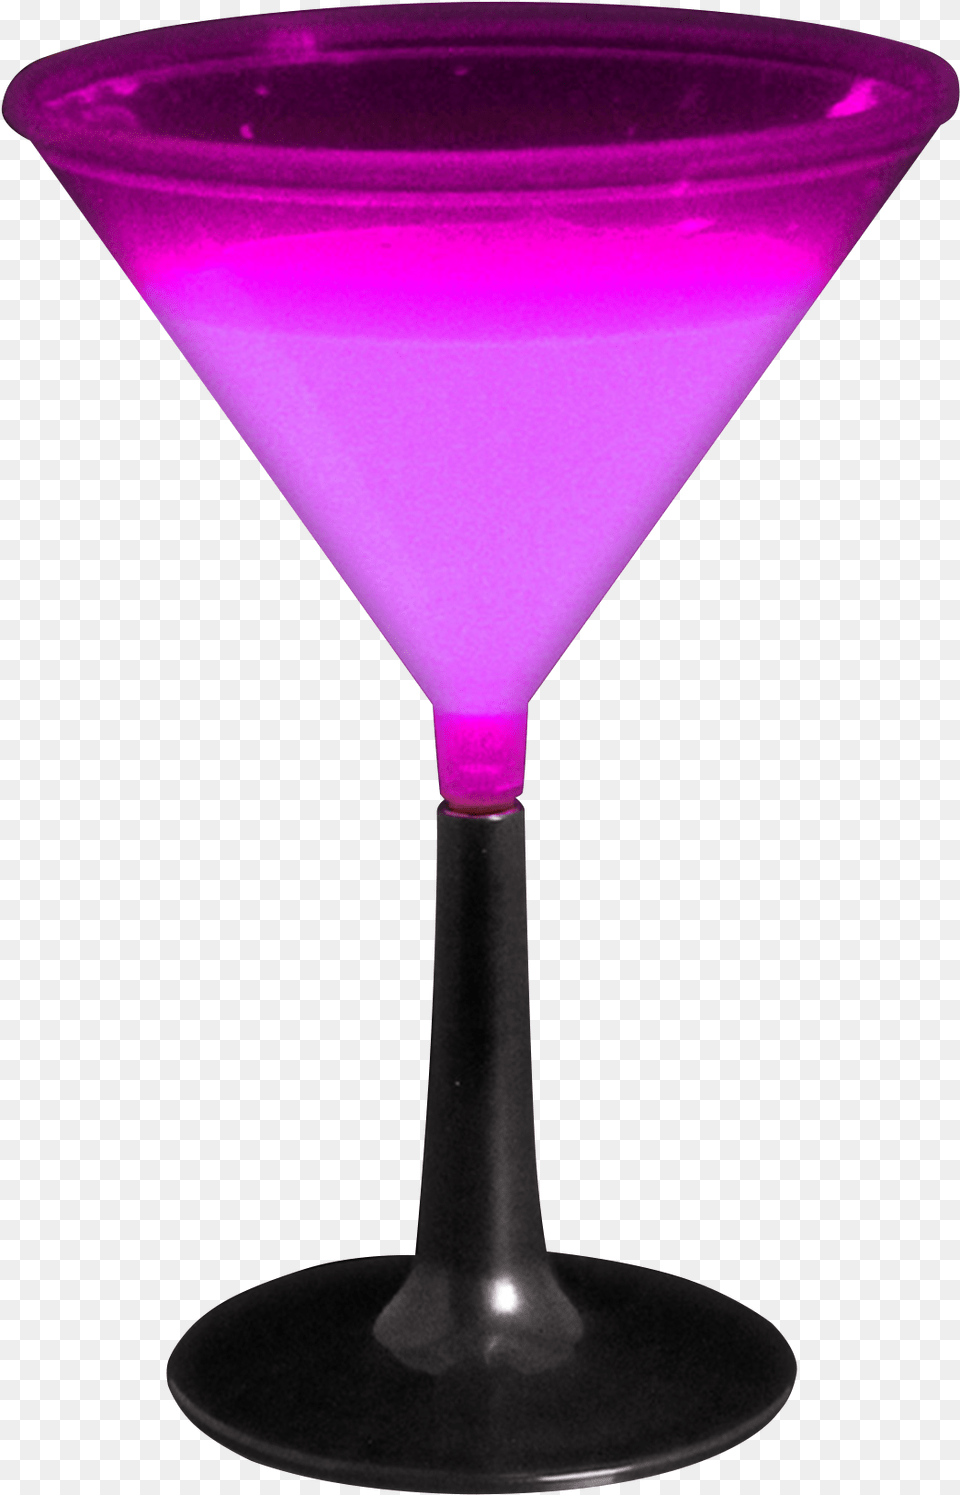 Pink Martini Glass Martini Glass, Alcohol, Beverage, Cocktail, Smoke Pipe Free Png